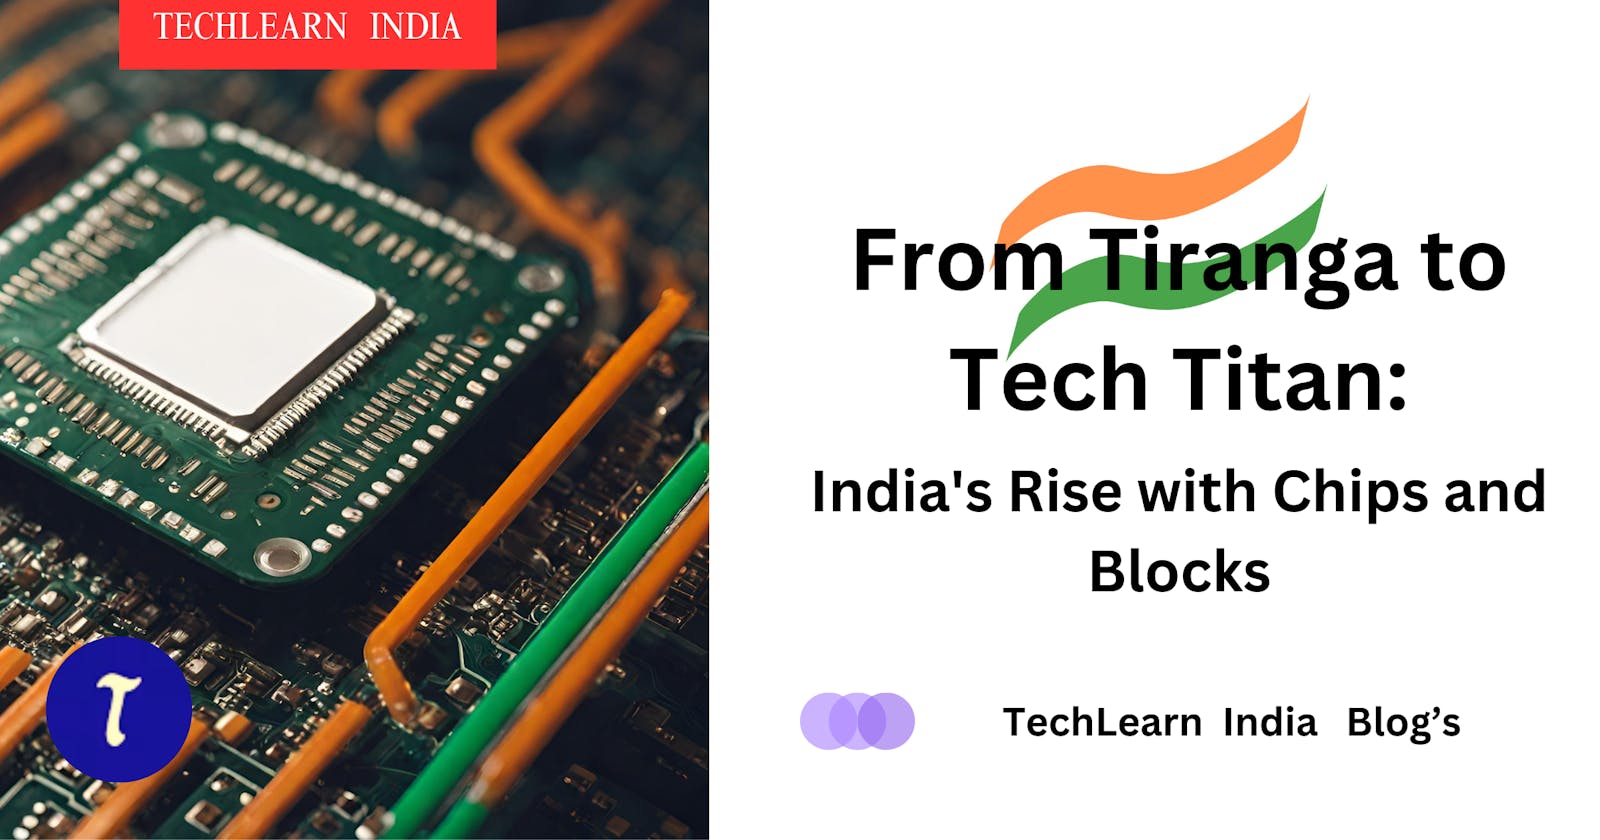 From Tiranga to Tech Titan: India's Rise with Chips and Blocks